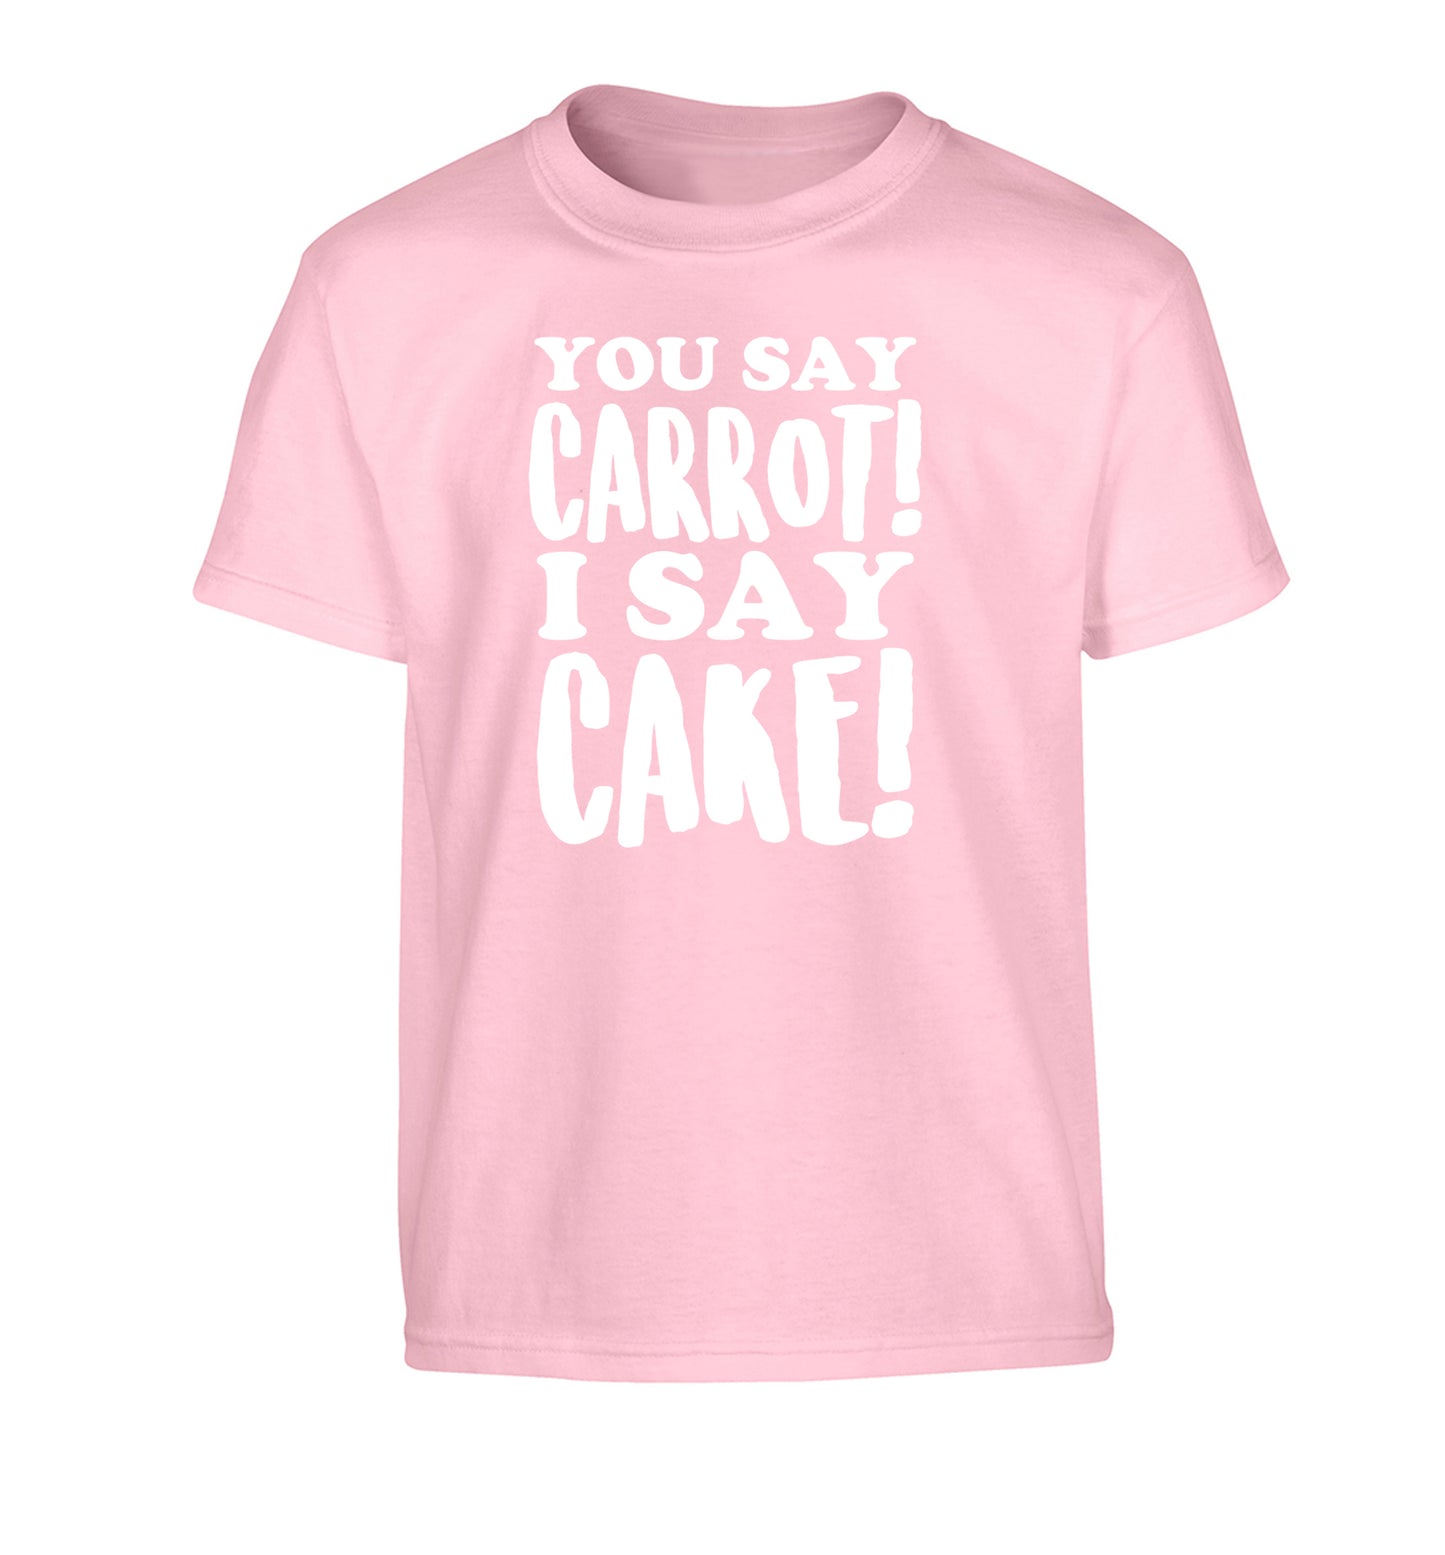 You say carrot I say cake! Children's light pink Tshirt 12-14 Years